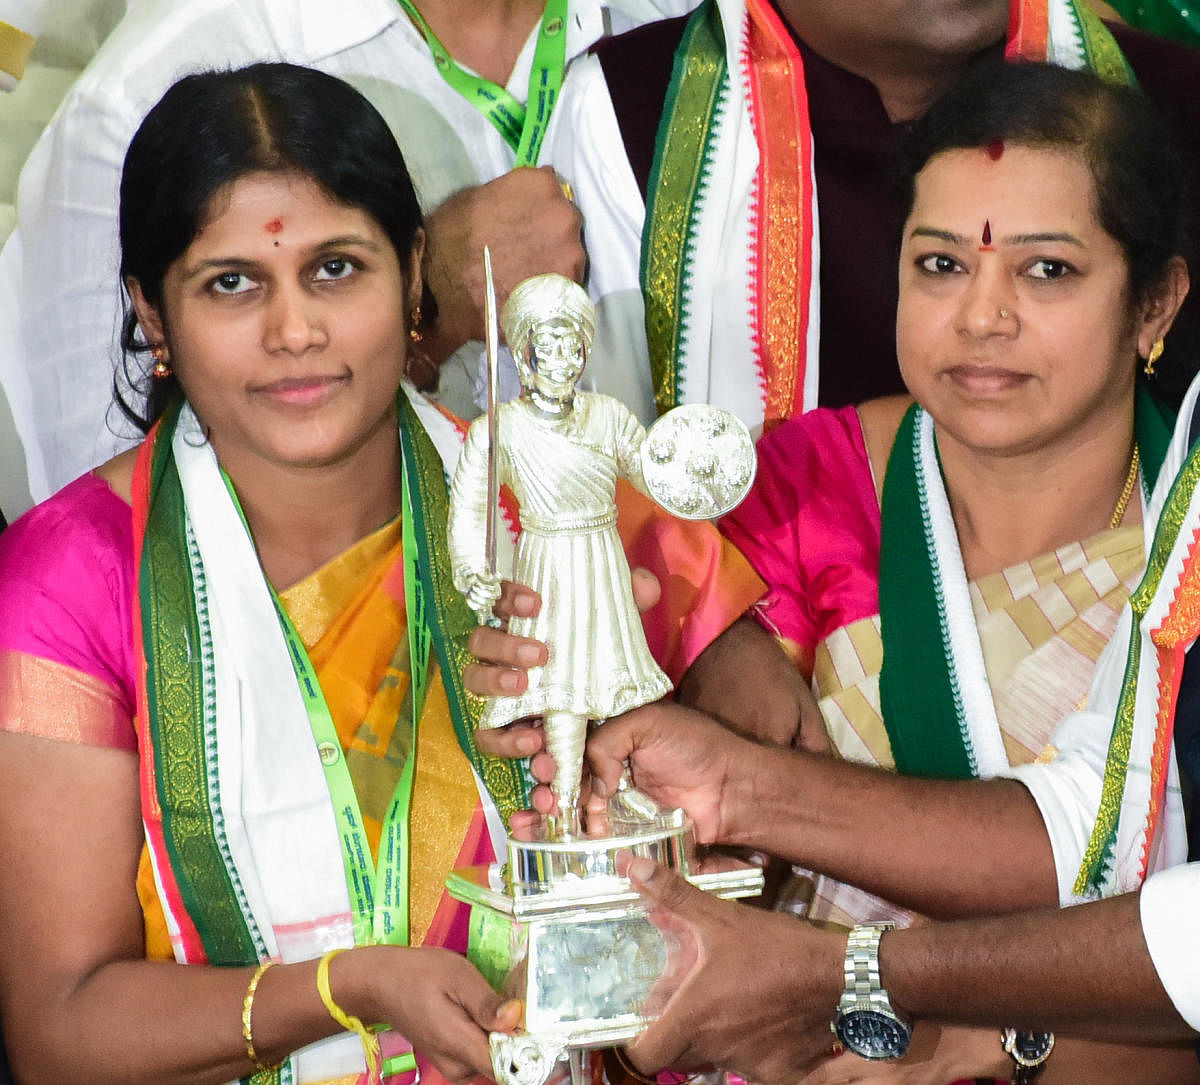 After 22 years, two women helm Bengaluru civic body